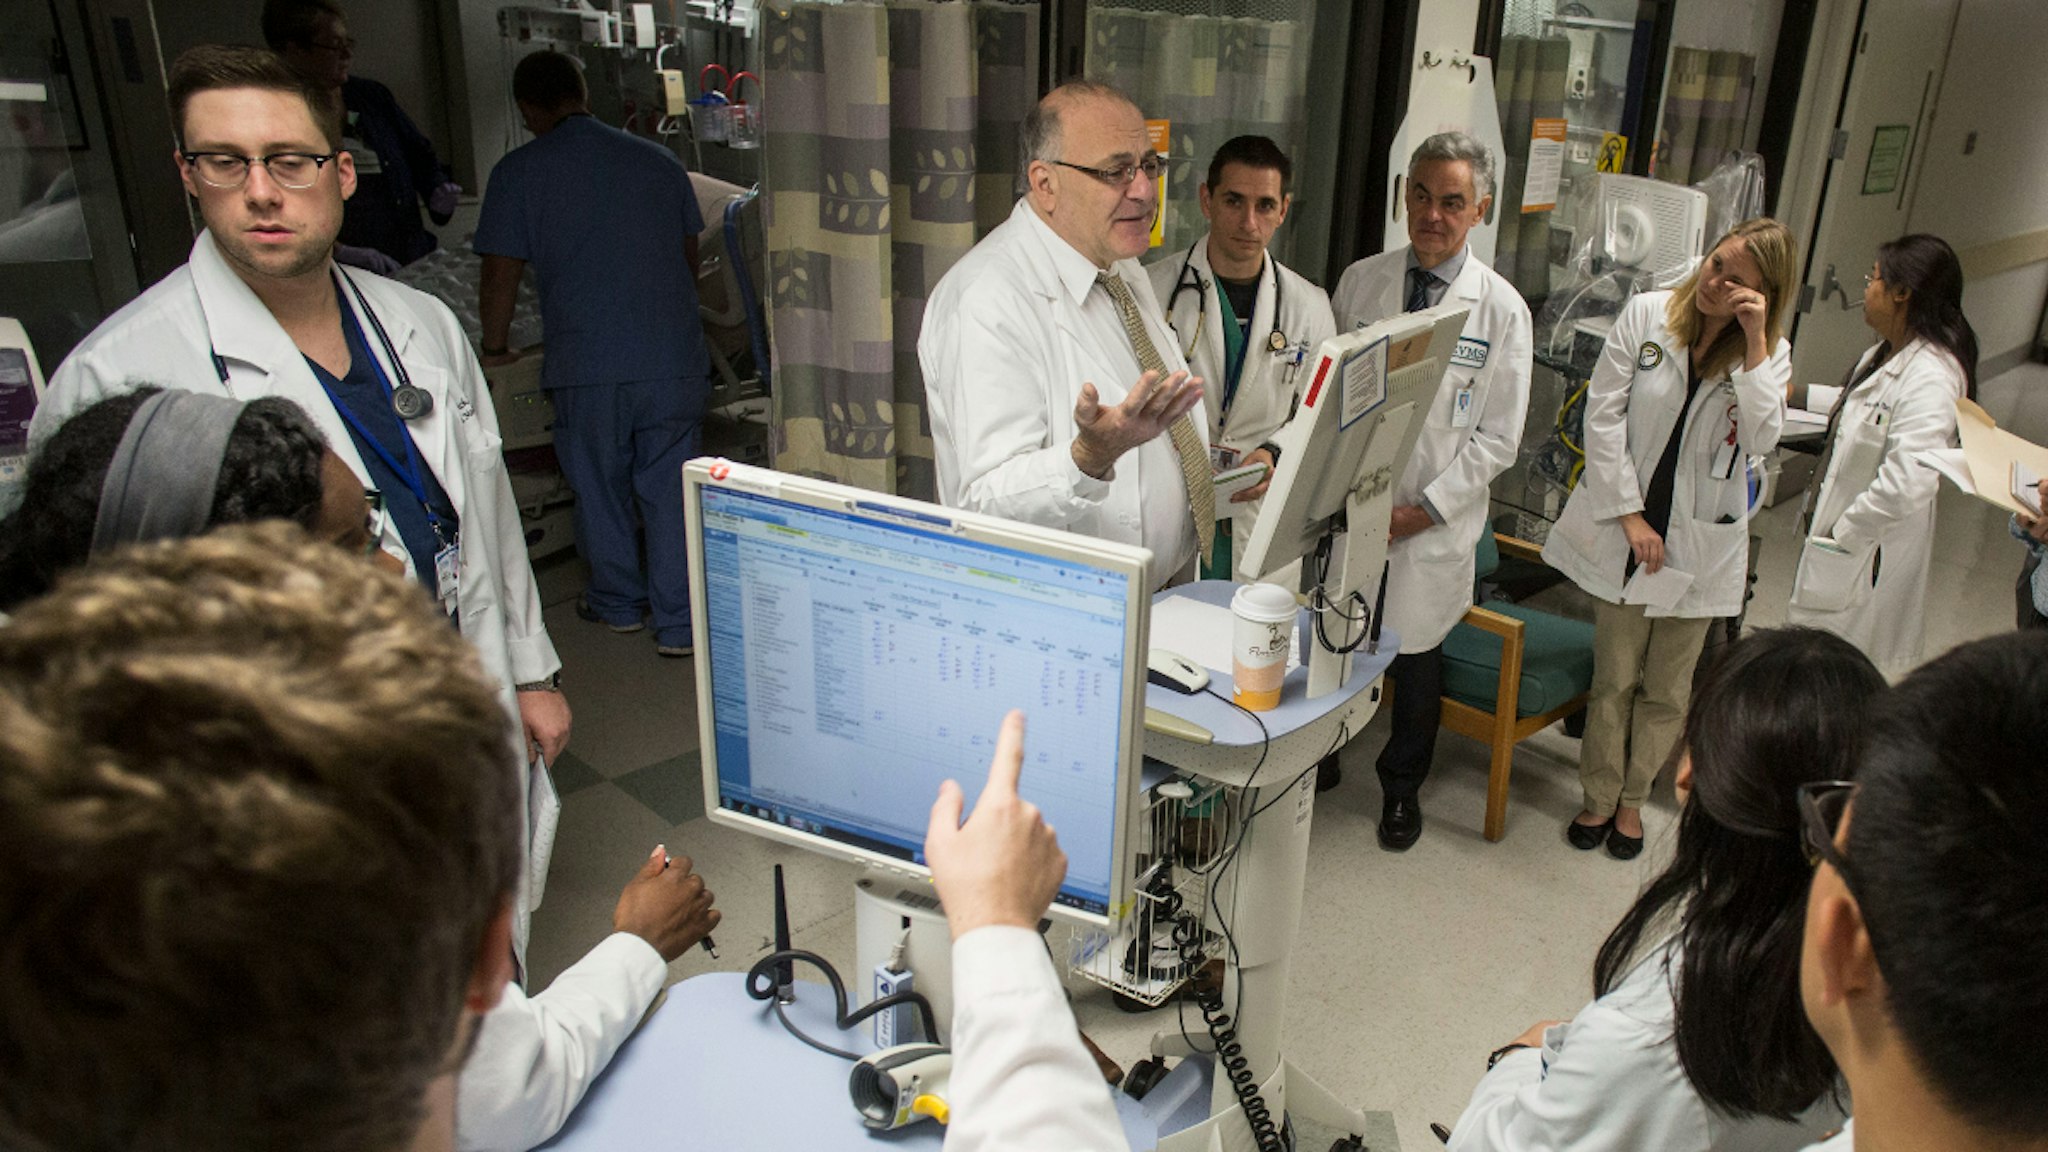 Dr. Paul Marik, center, discusses patient care with medical students and resident physicians during morning rounds at Sentara Norfolk General hospital on Monday, Oct. 20, 2014 in Norfolk, Va. (Photo by Jay Westcott/For The Washington Post via Getty Images)